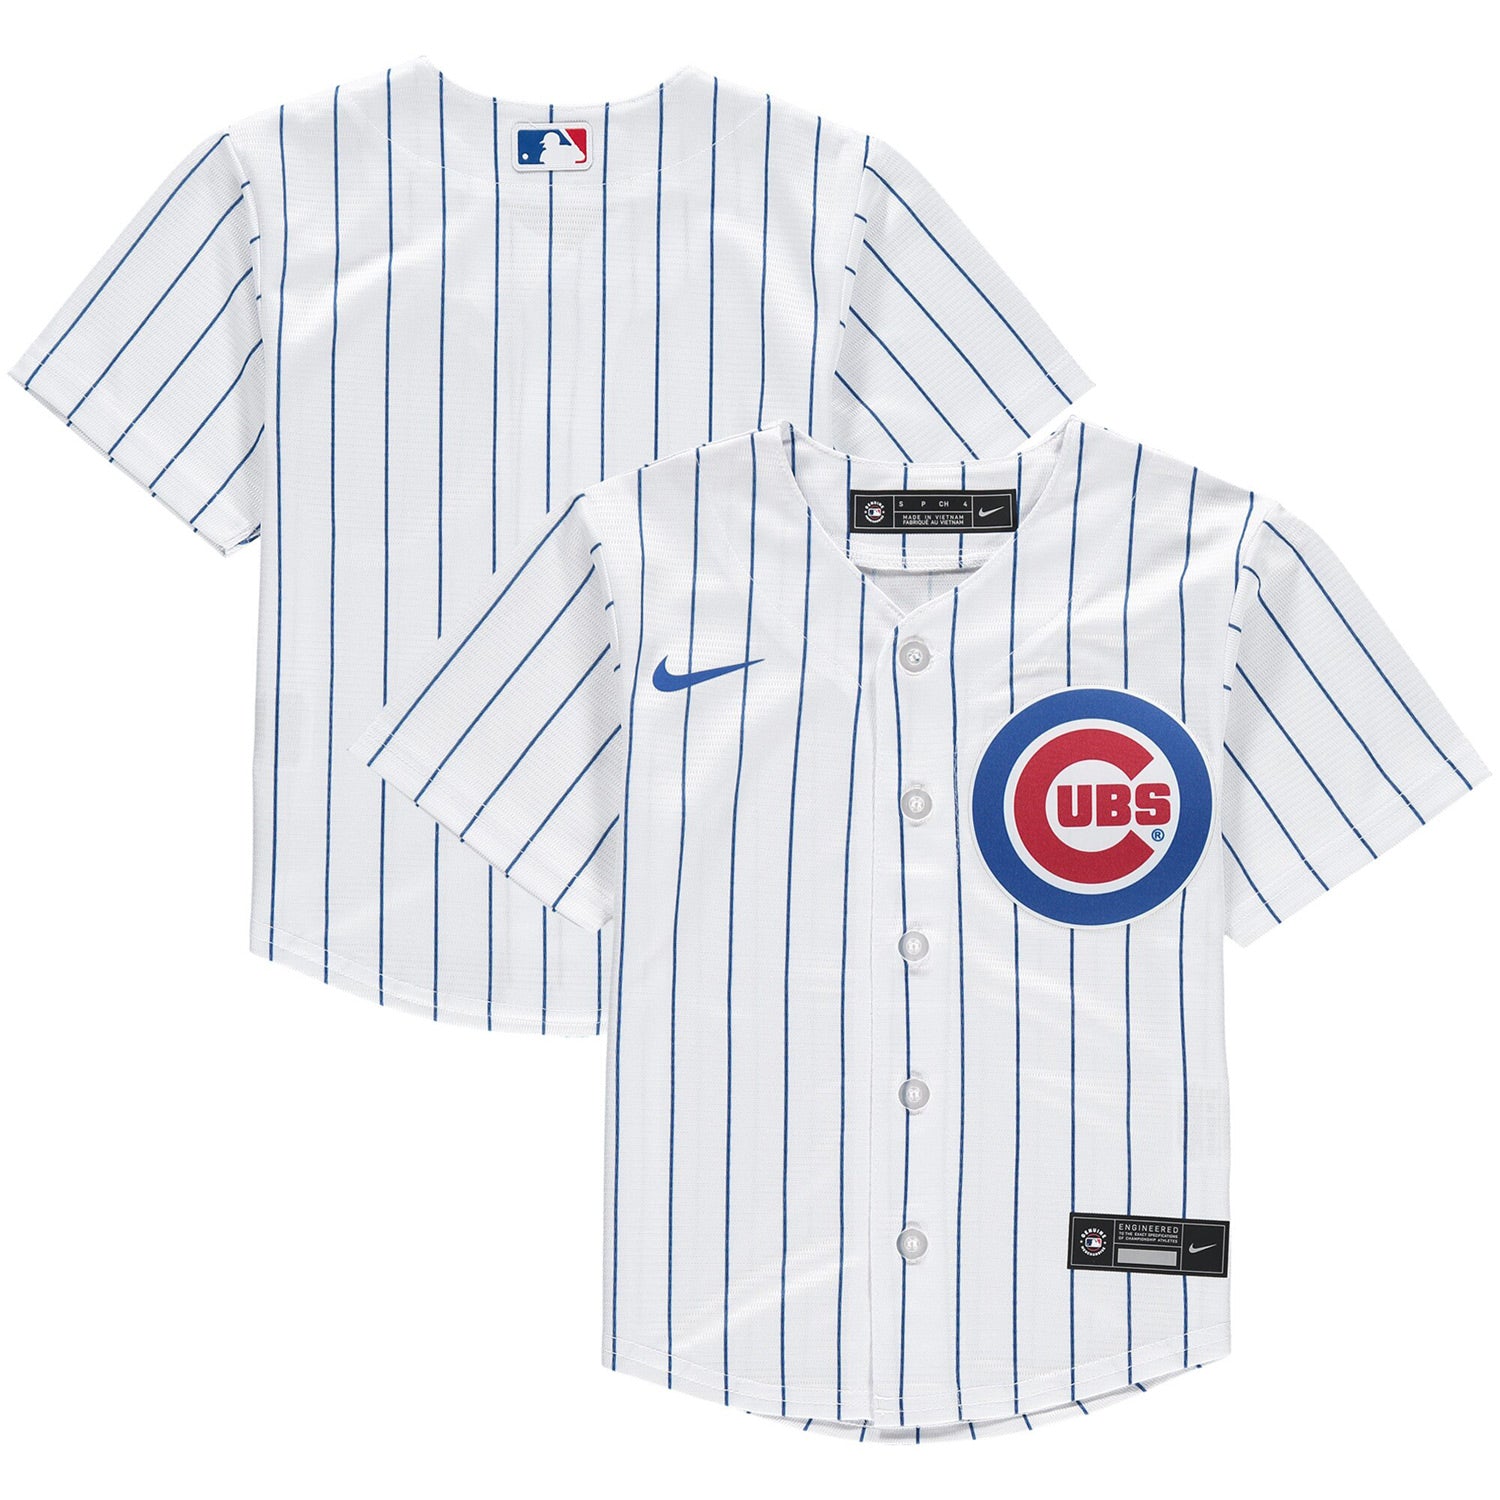 Chicago Cubs Jerseys in Chicago Cubs Team Shop 